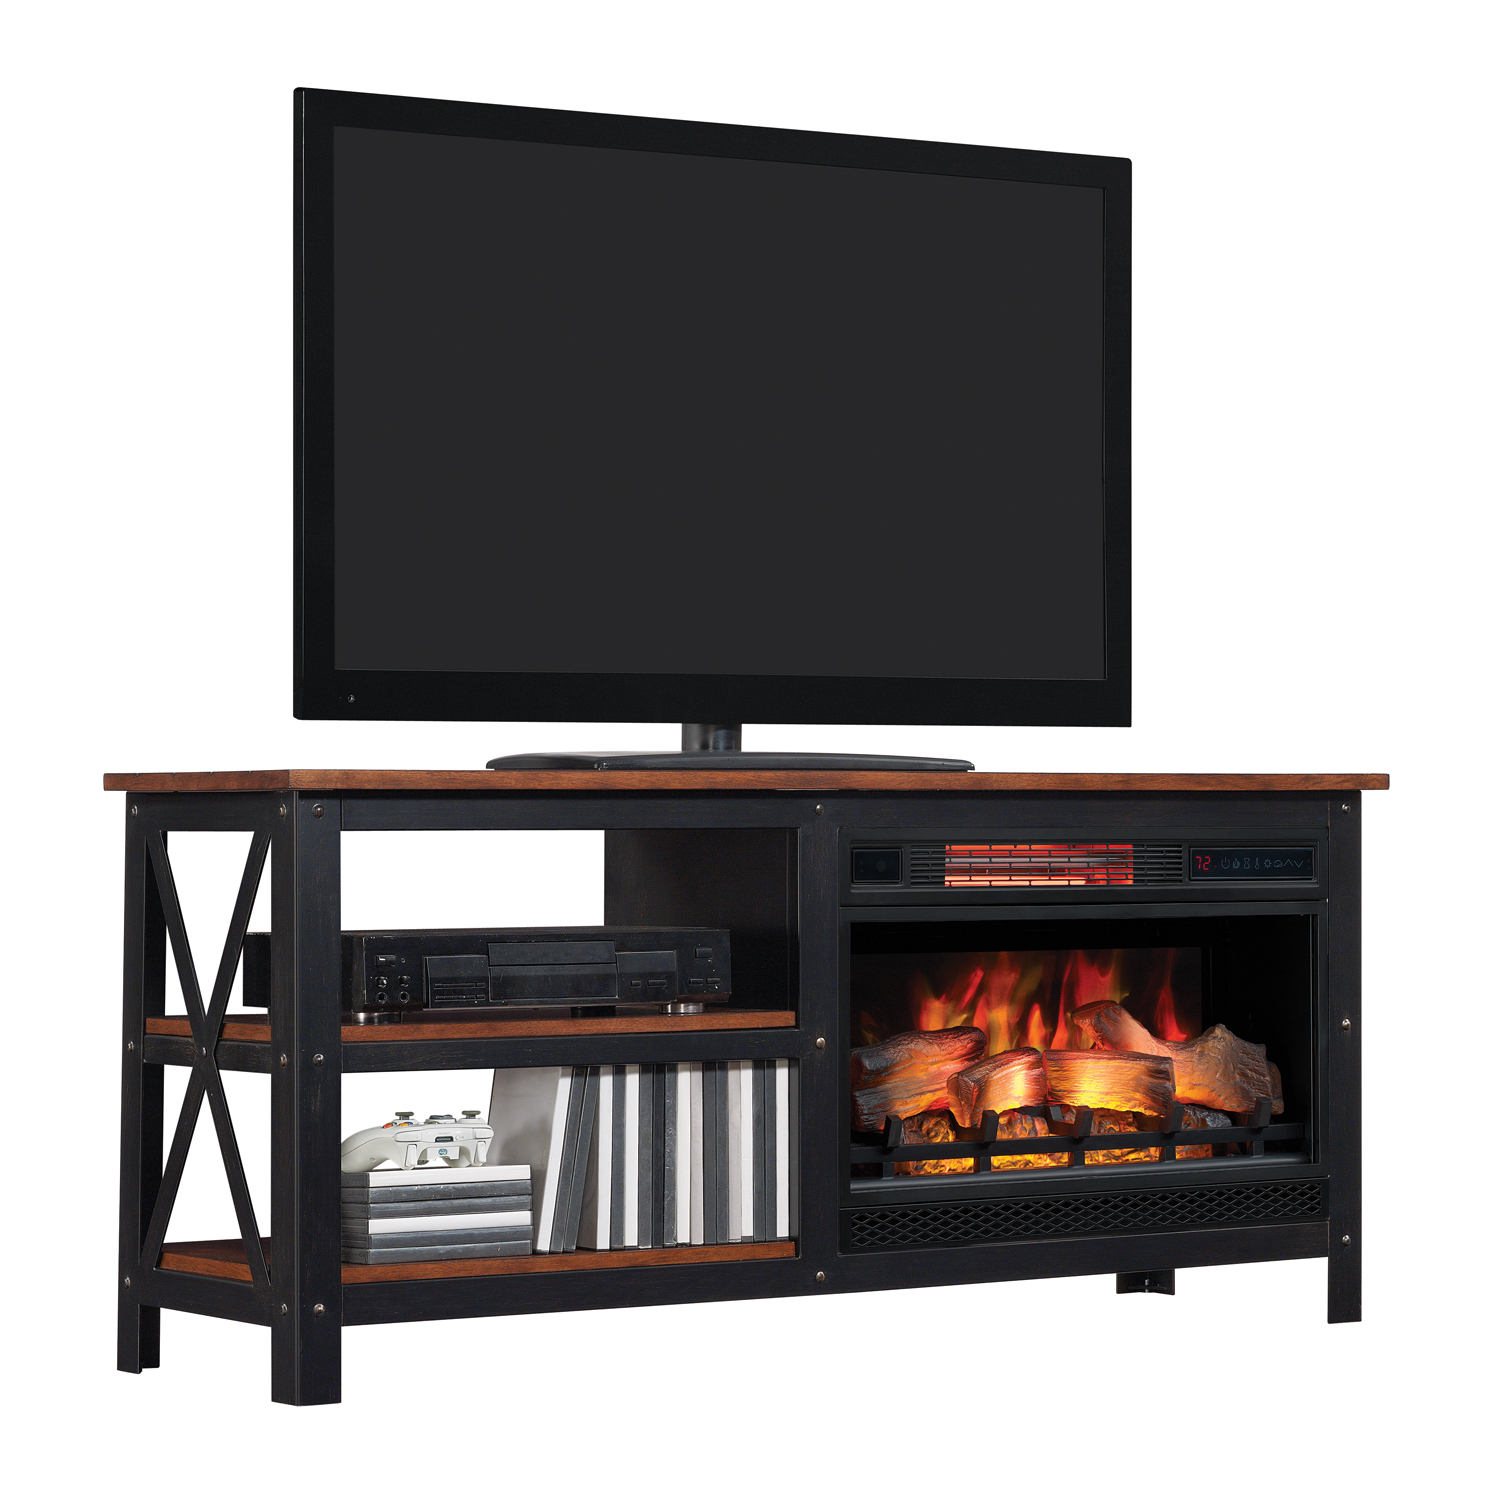 50 Tv Stand with Fireplace Fresh Grainger Tv Stand